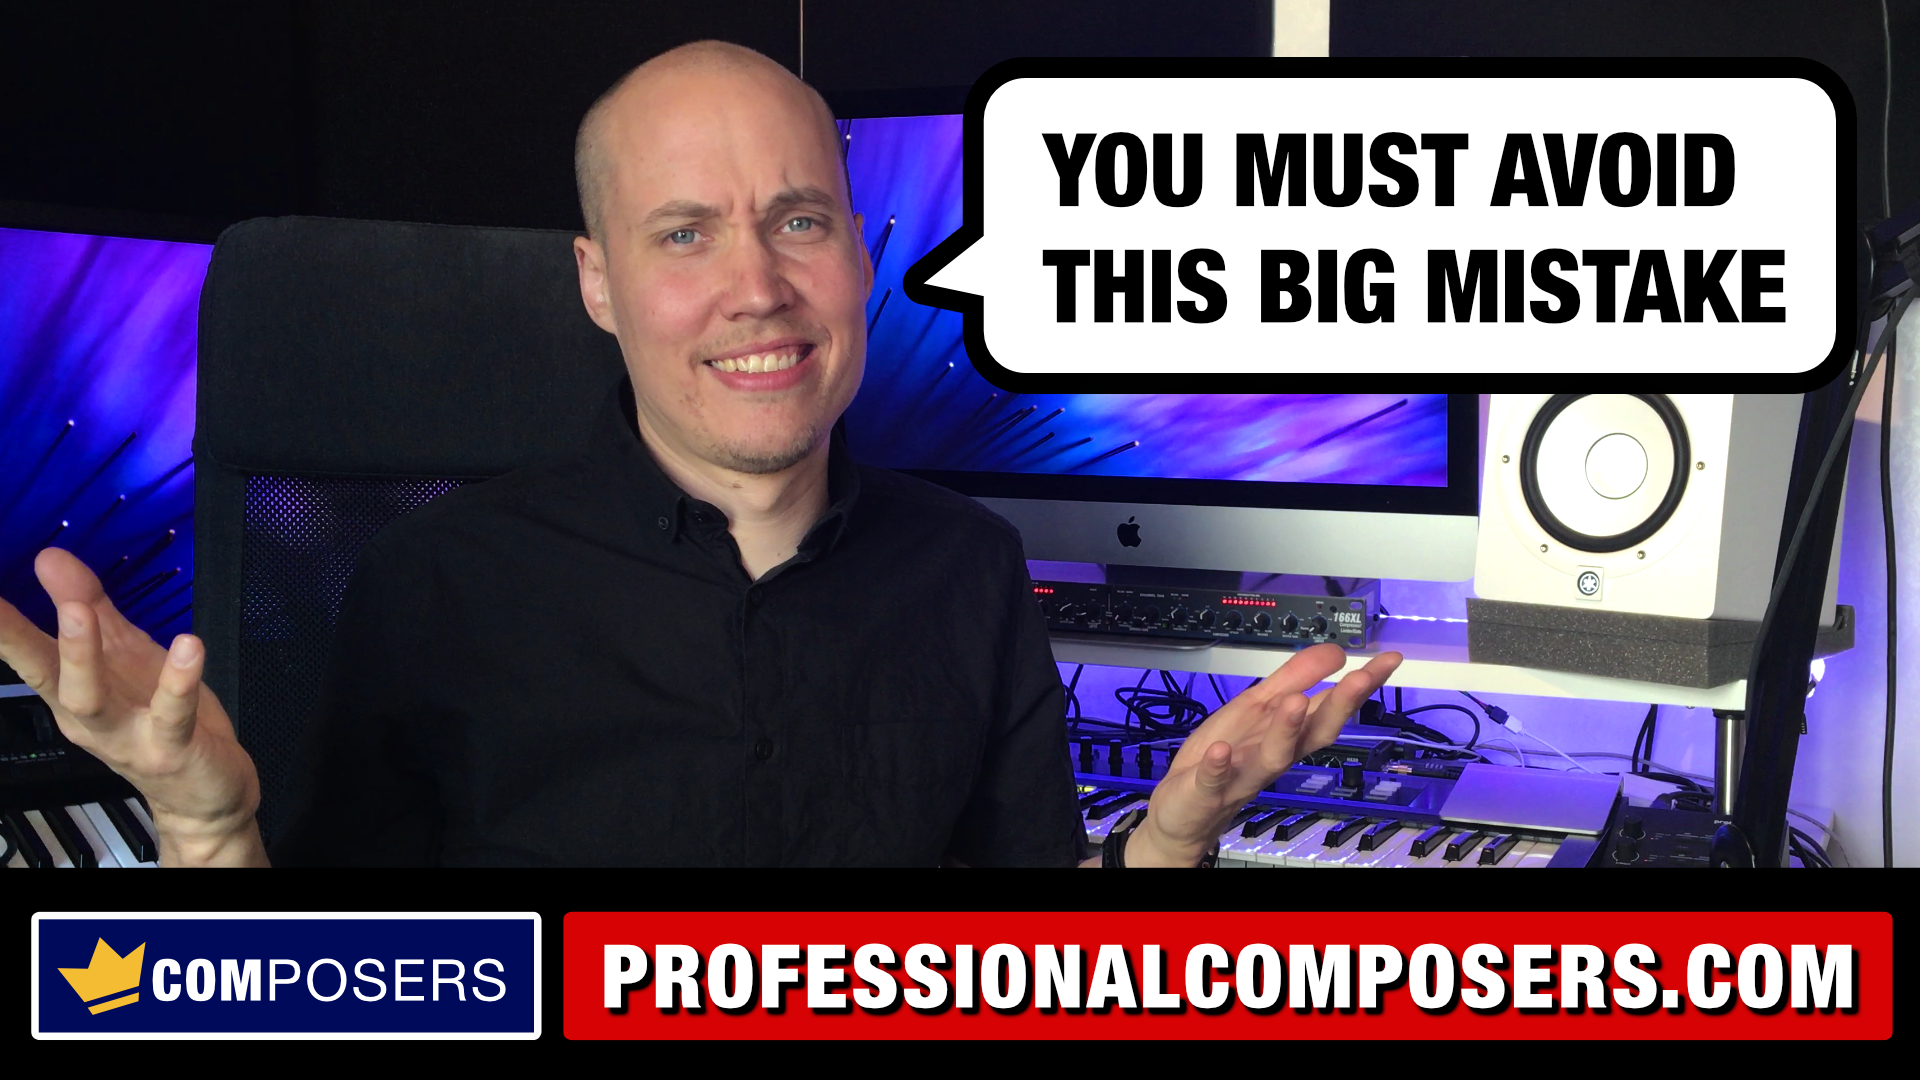 Please Avoid this Crazy Mistake as a Composer